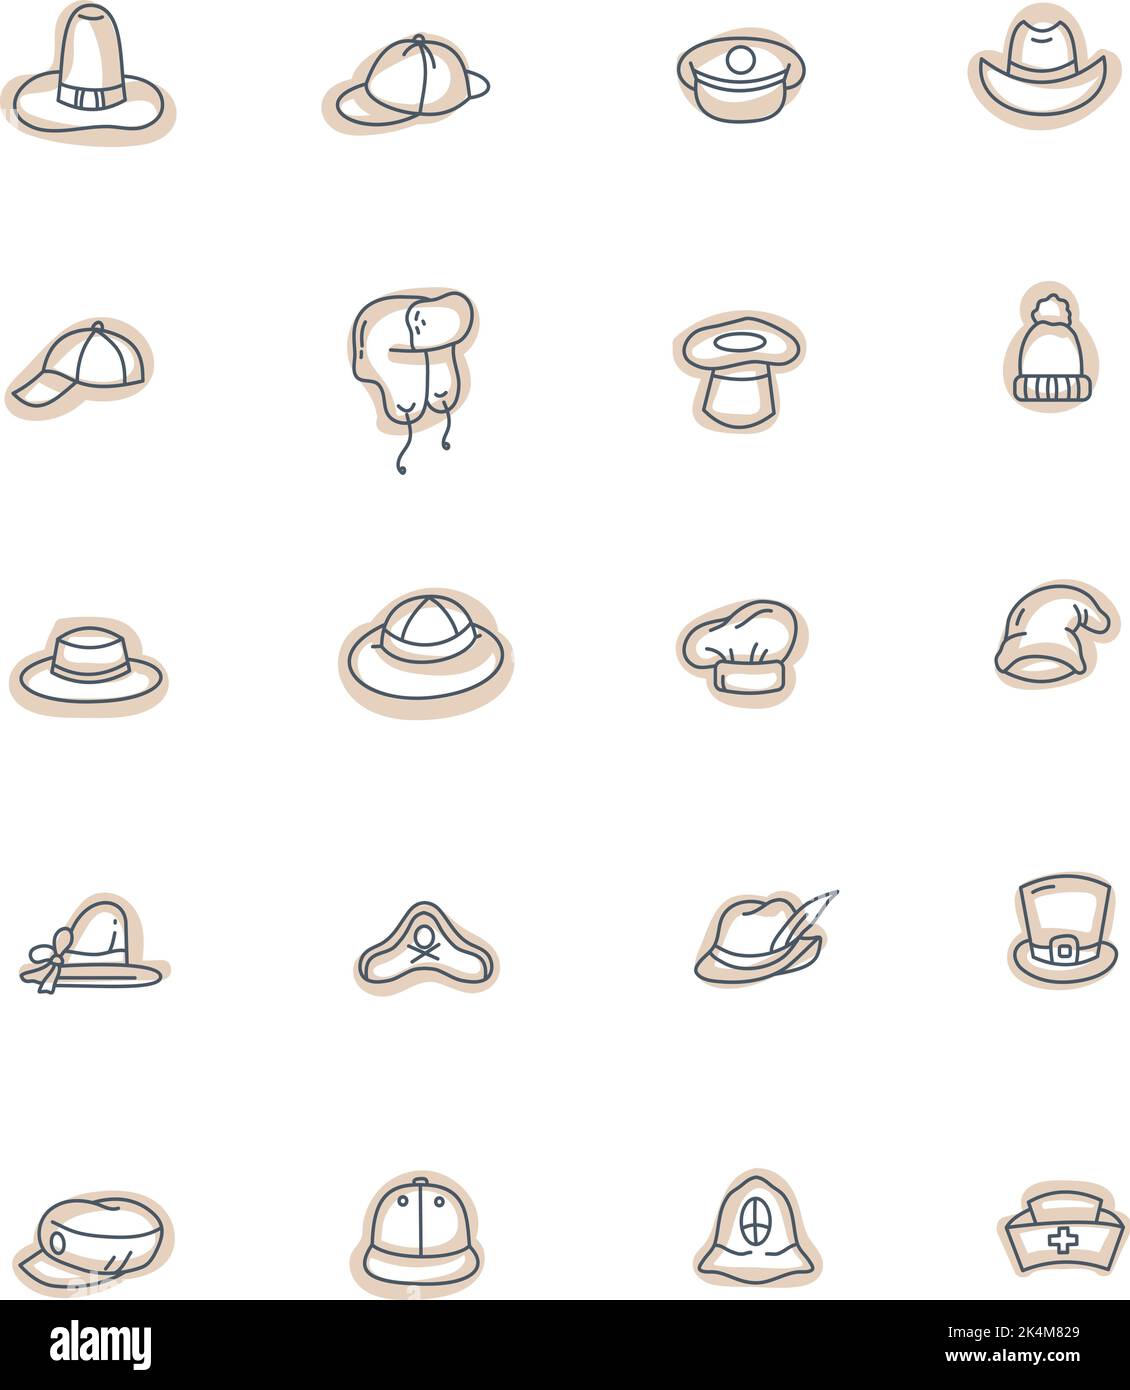 Male and female hats, illustration, vector on a white background. Stock Vector